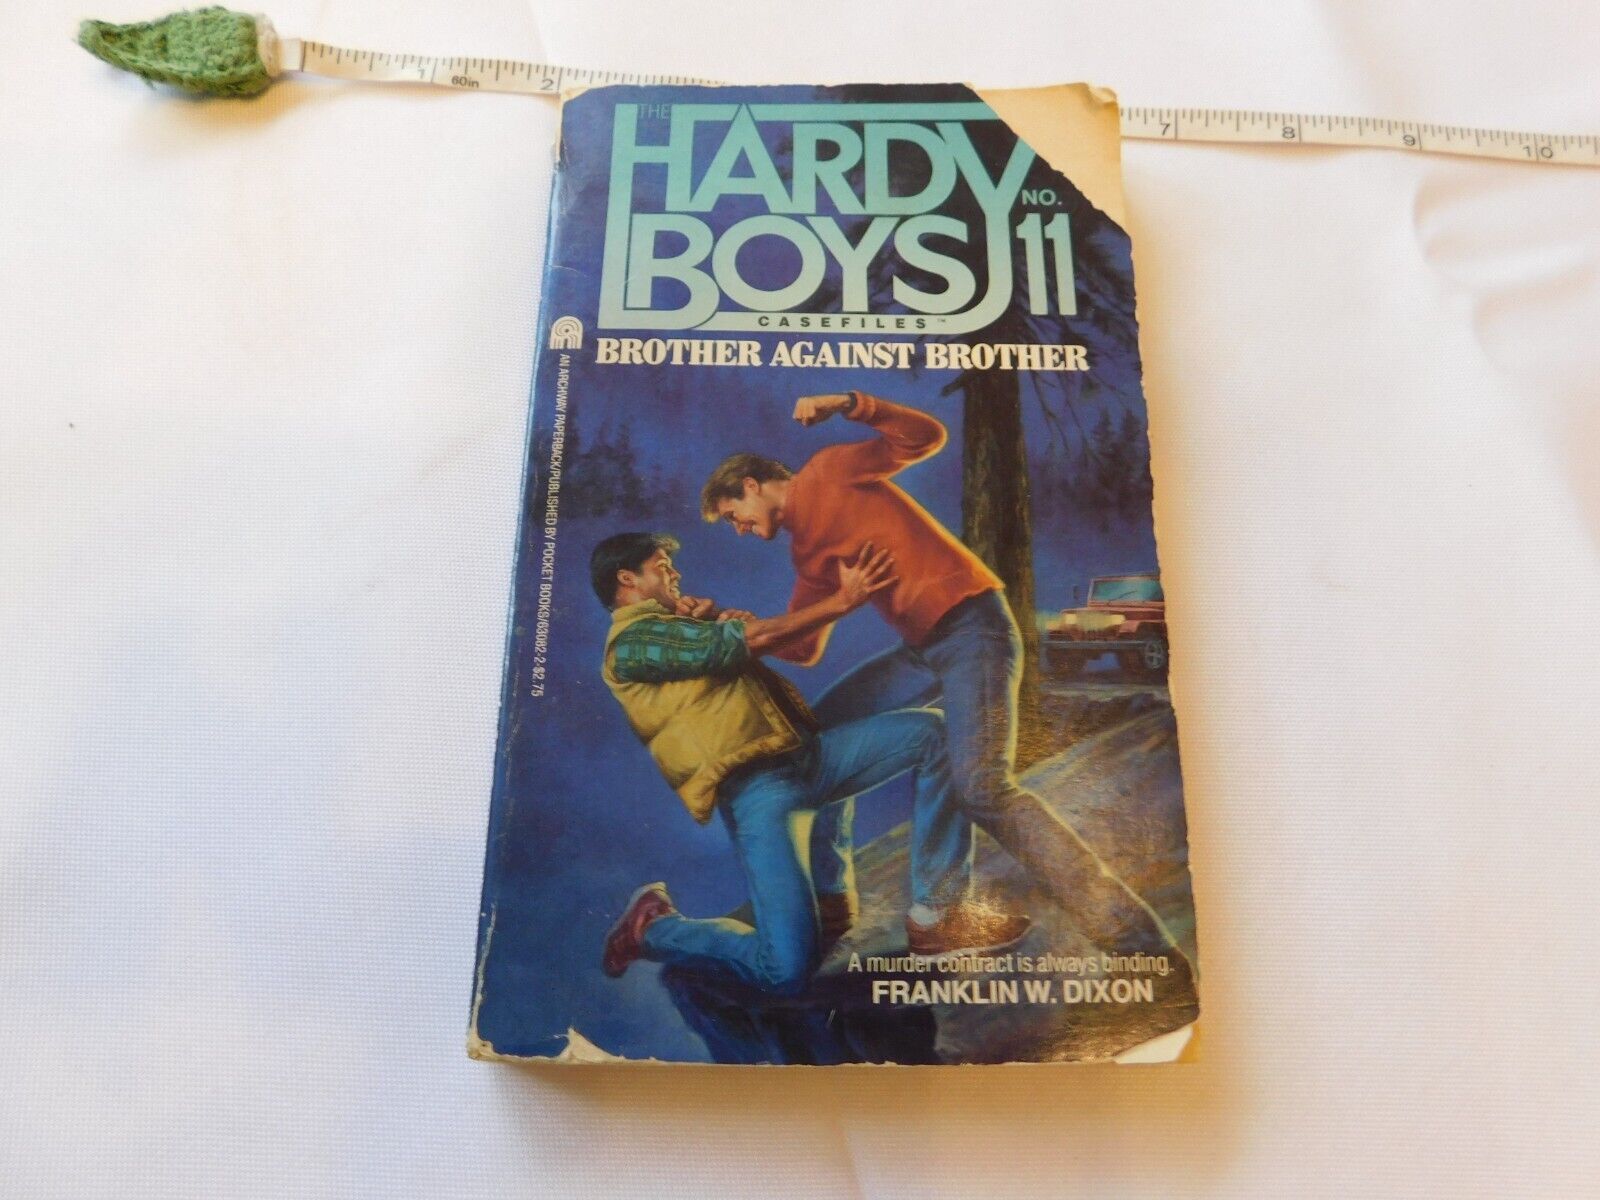 Primary image for The Hardy Boys Case Files No 11 Brother Against Brother by Franklin W Dixon Book